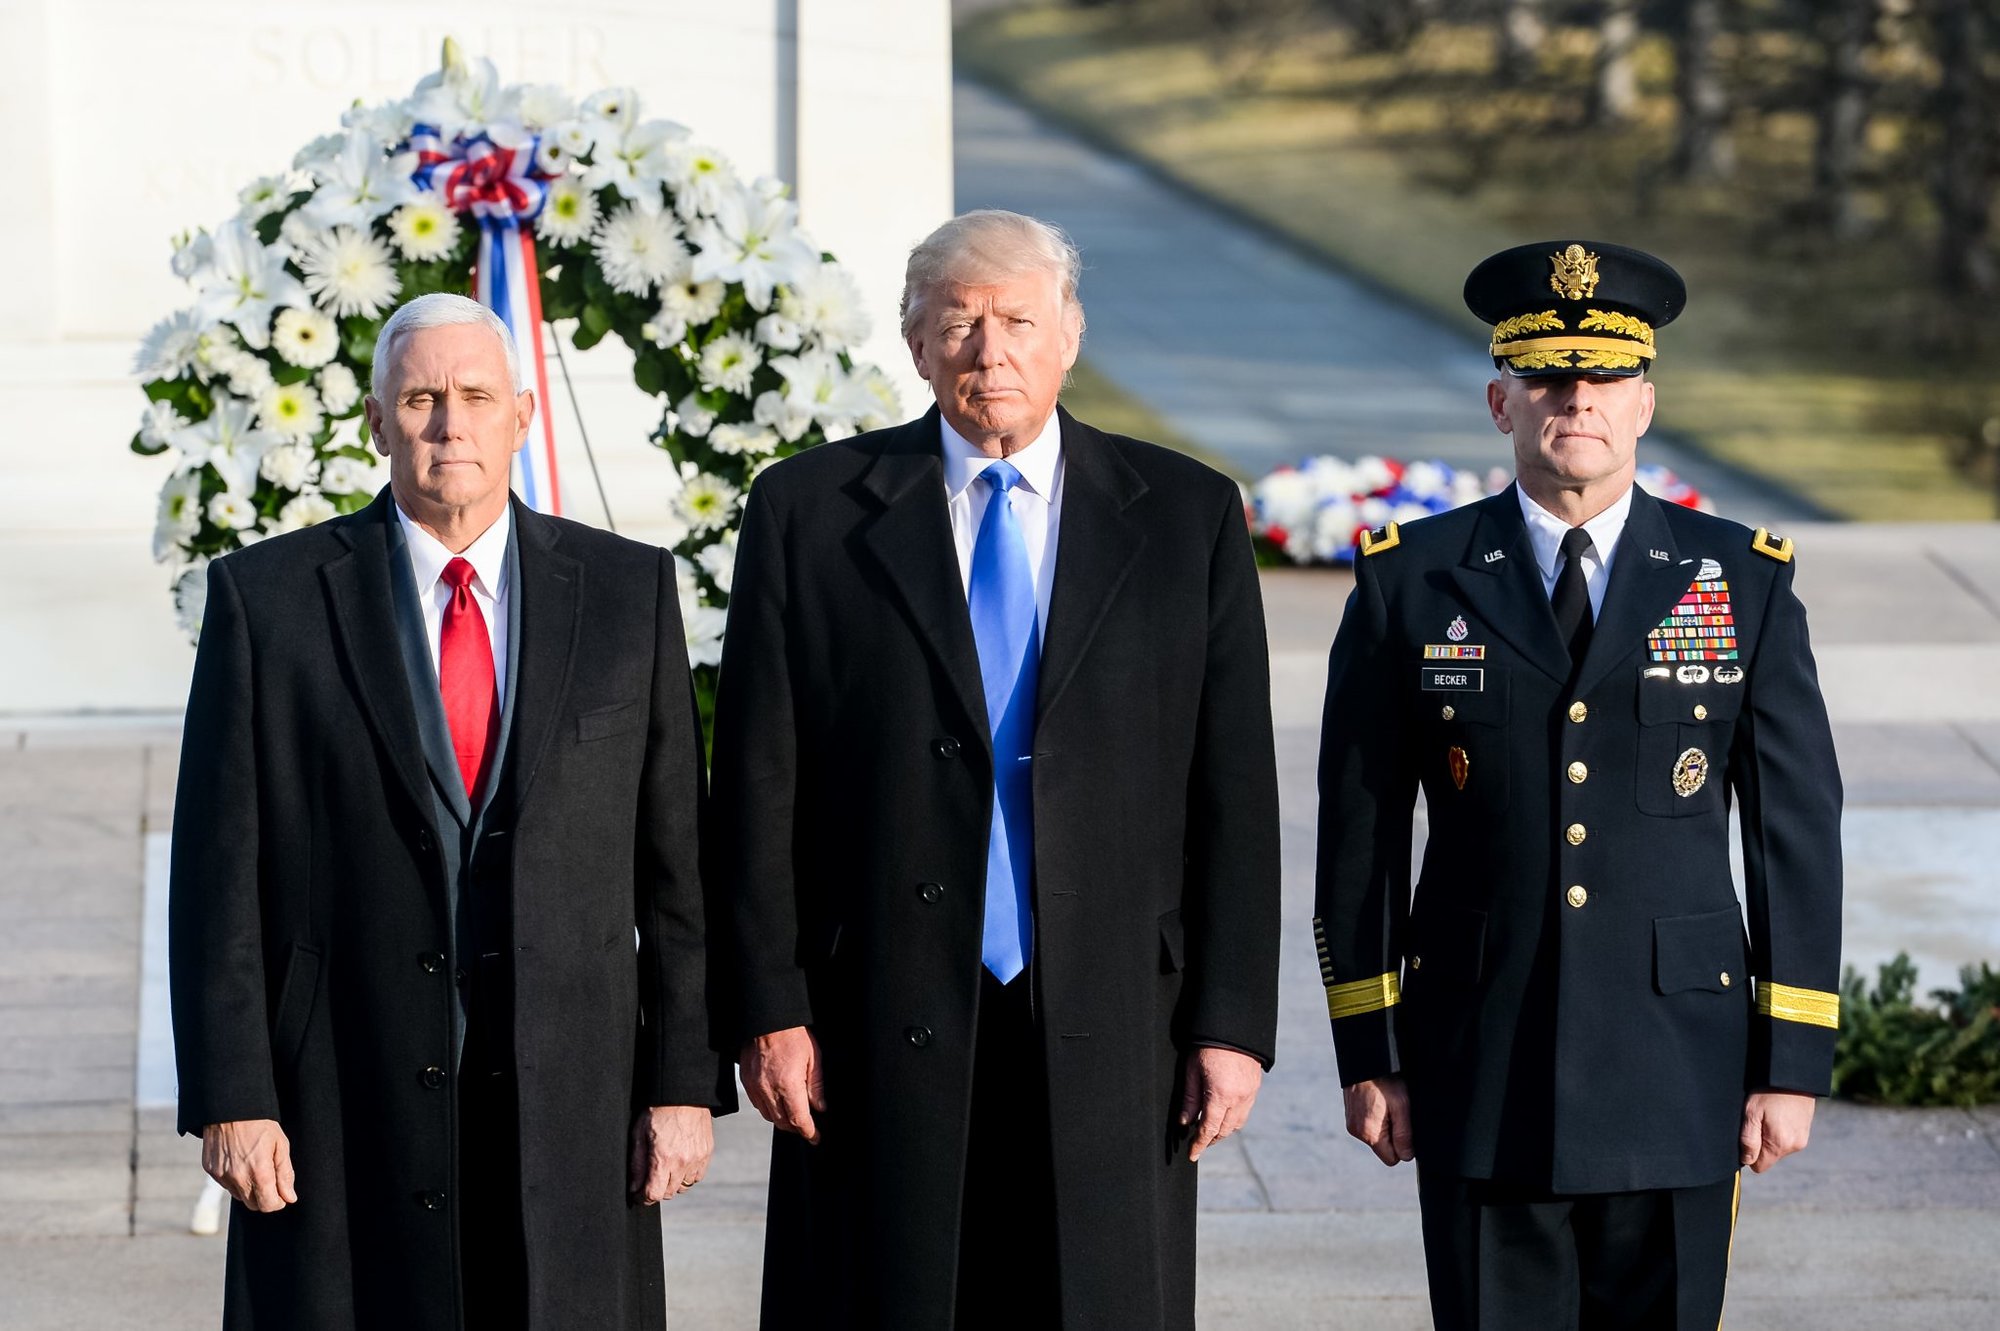 From the left, Vice President-elect Mike Pence, President-elect Donald J. Trump and Maj. Gen. Bradley A. Becker, Commanding General, Joint Task Force-National Capital Region and the U.S. Army Military District of Washington pause following a wreath-laying ceremony at the Tomb of the Unknown Soldier in Arlington National Cemetery, Jan. 19, 2017, in Arlington, Va. Trump will be sworn-in as the 45th president of the United States during the Inauguration Ceremony Jan. 20, 2017, in Washington, D.C.  (U.S. Army photo by Sgt. Alicia Brand/released)